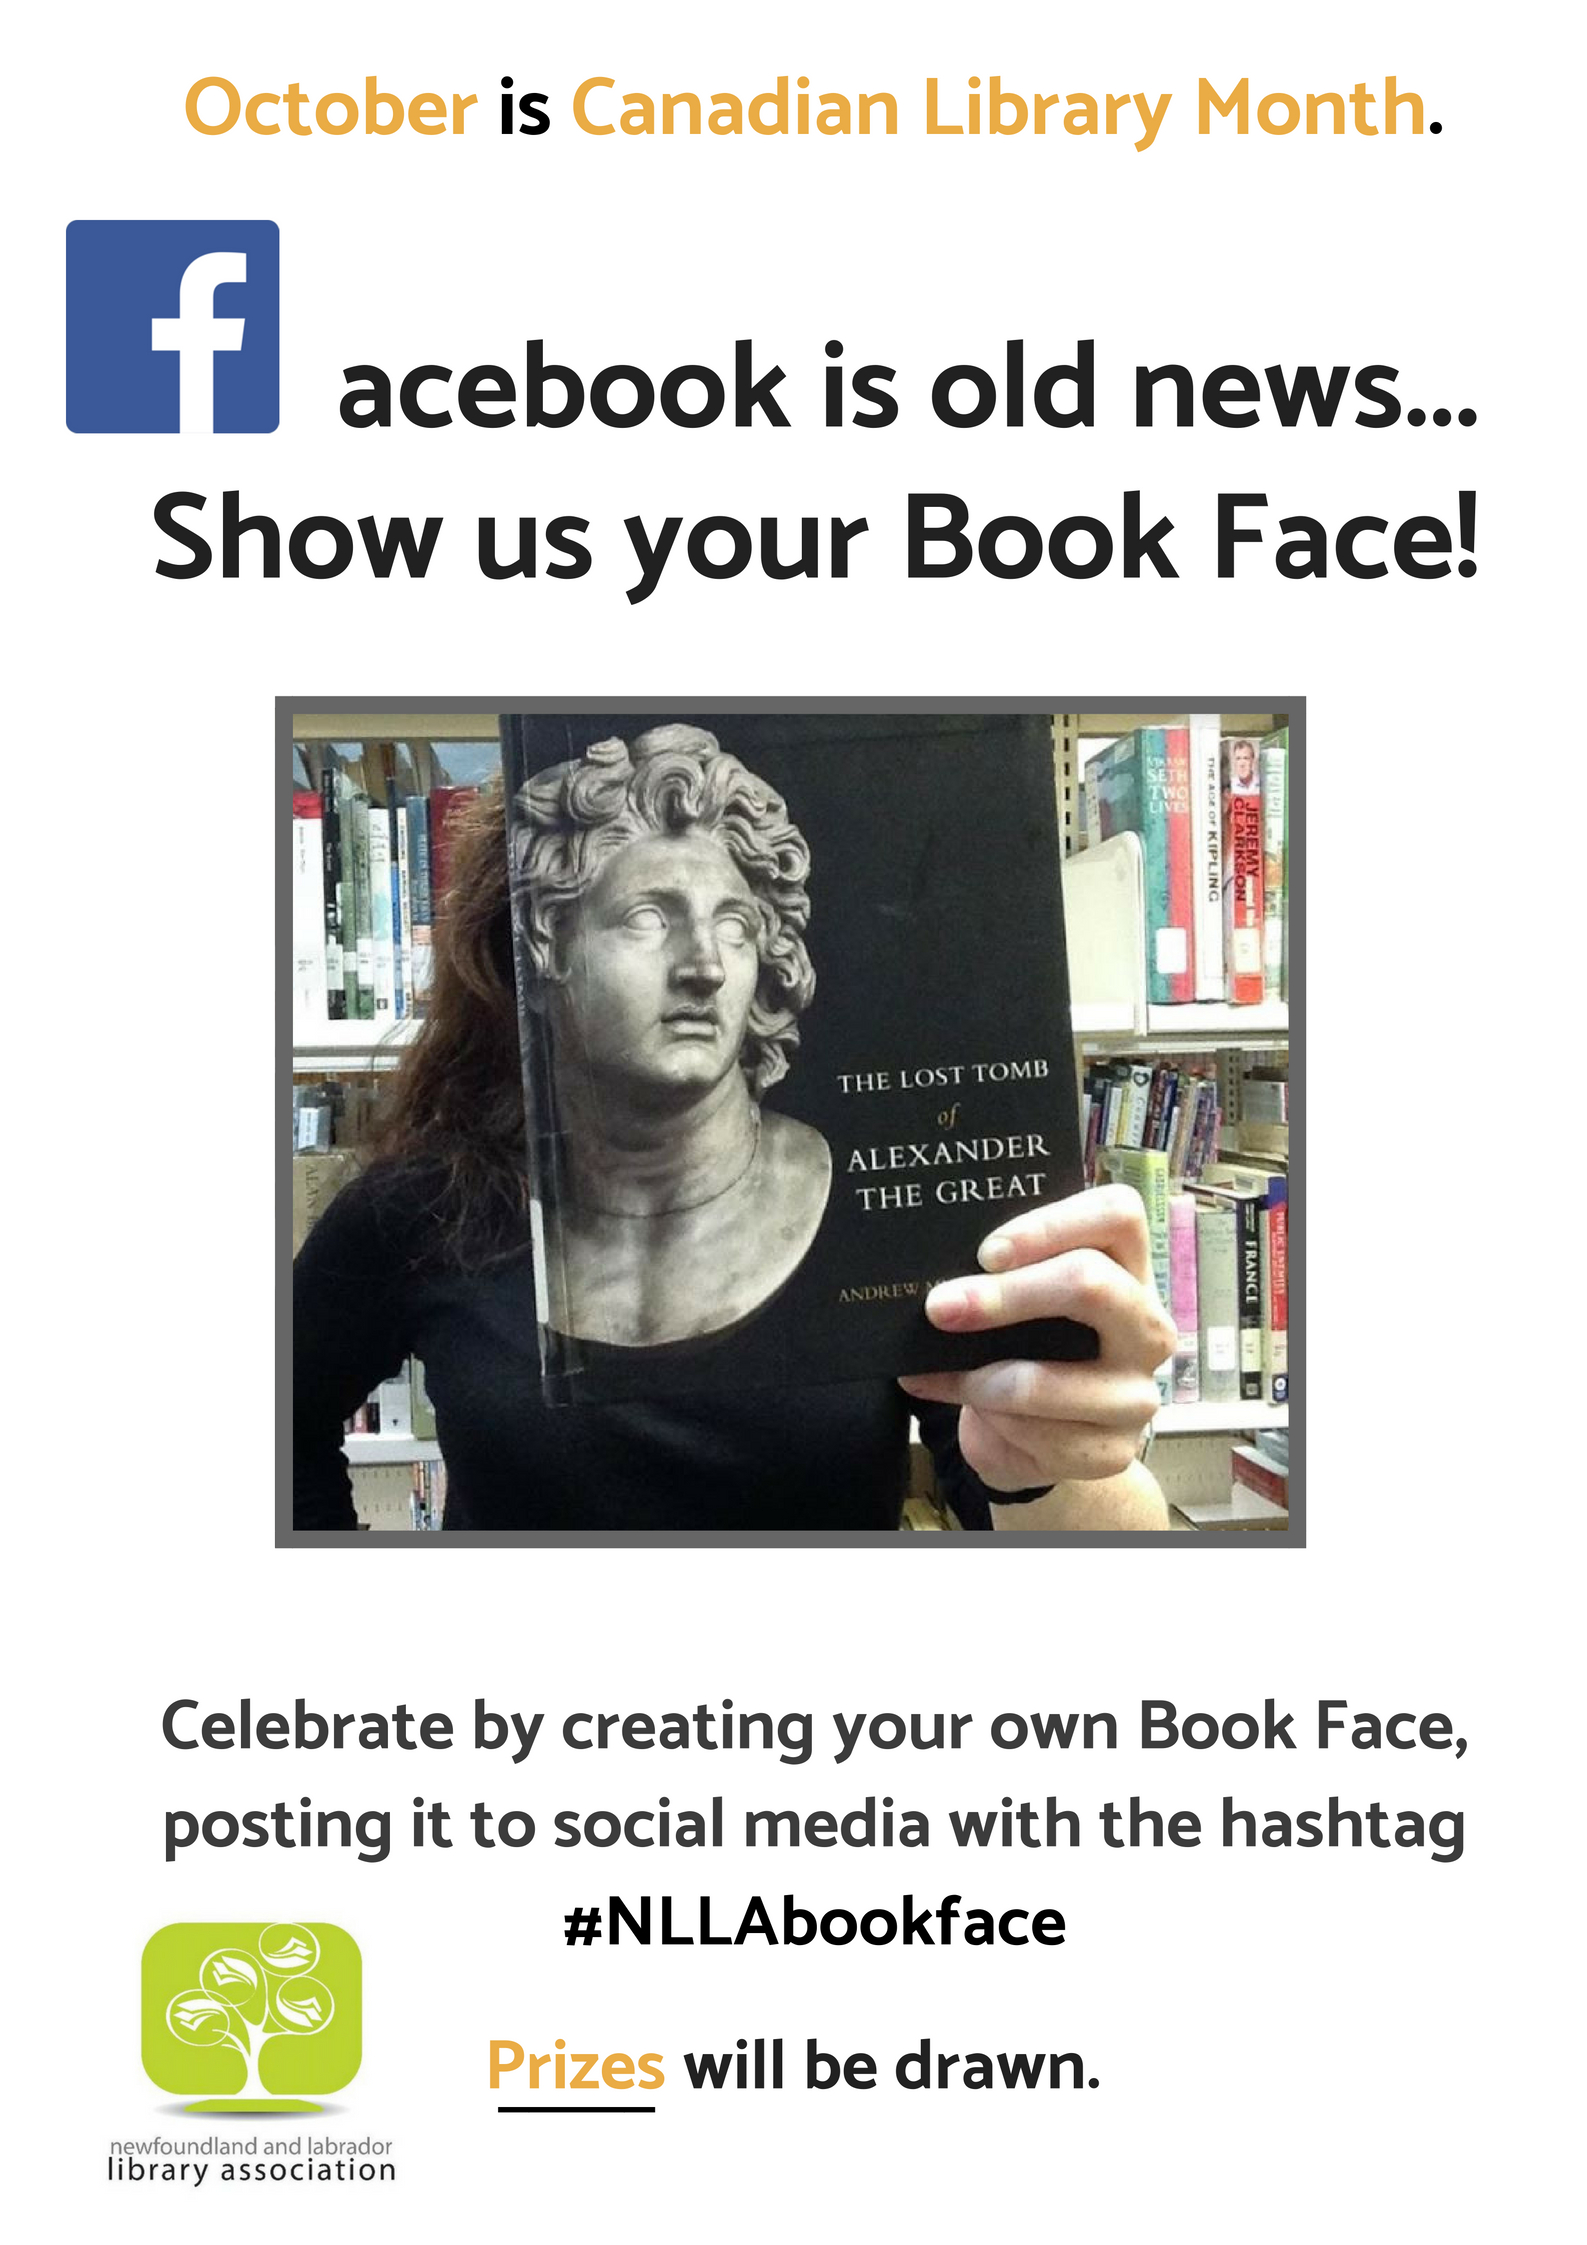 NLLABookFaceContest_PromoPoster